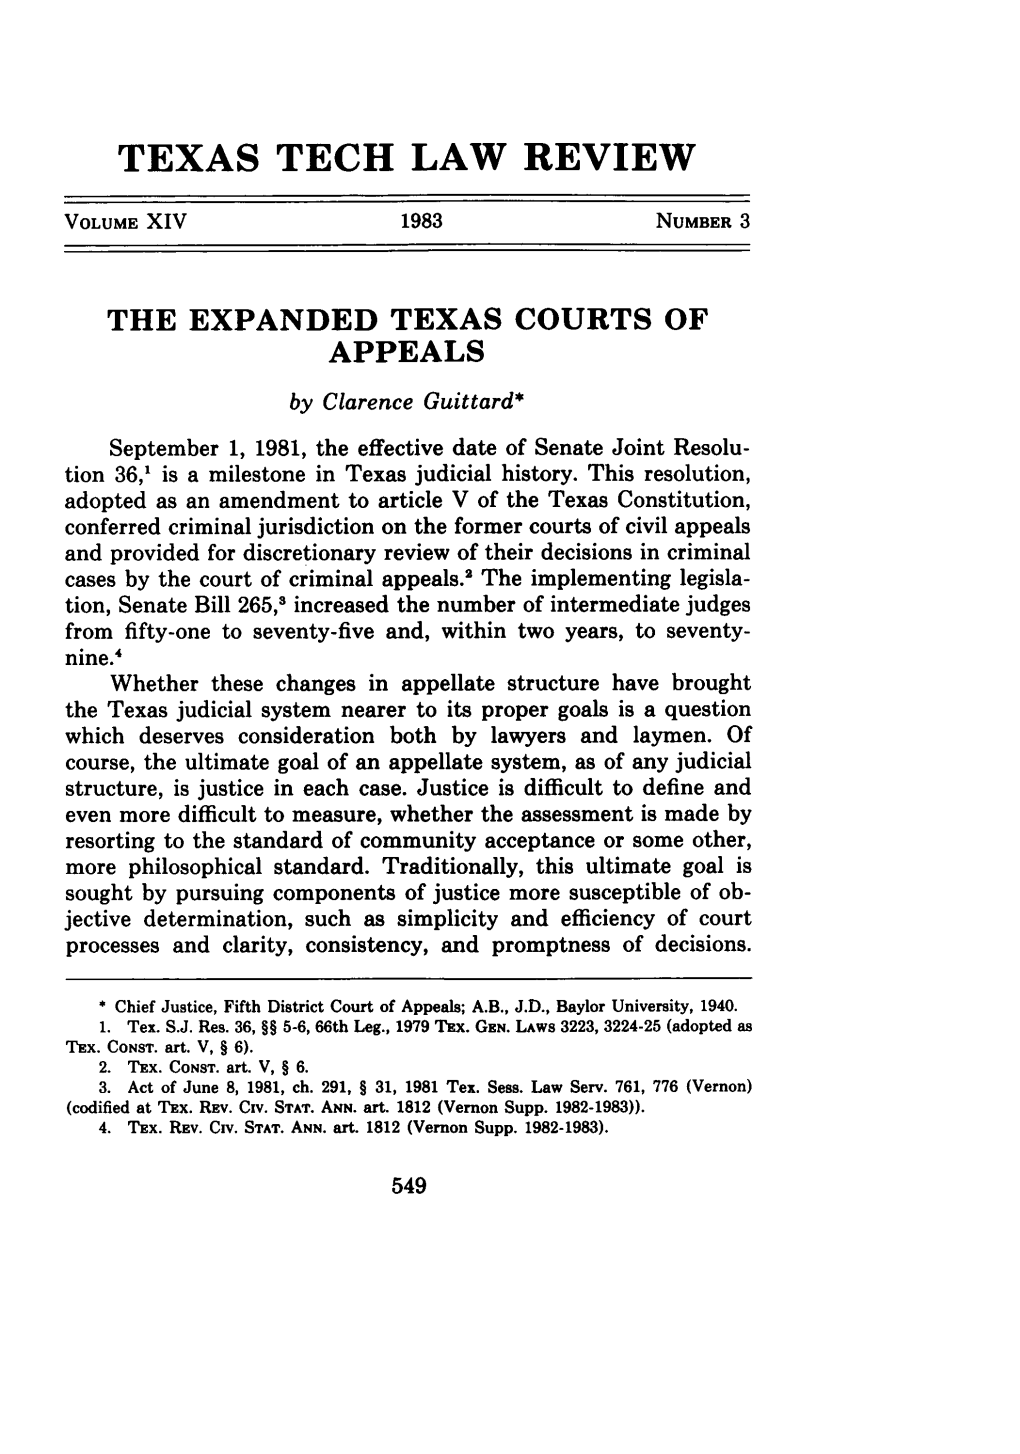 Expanded Texas Courts of Appeals